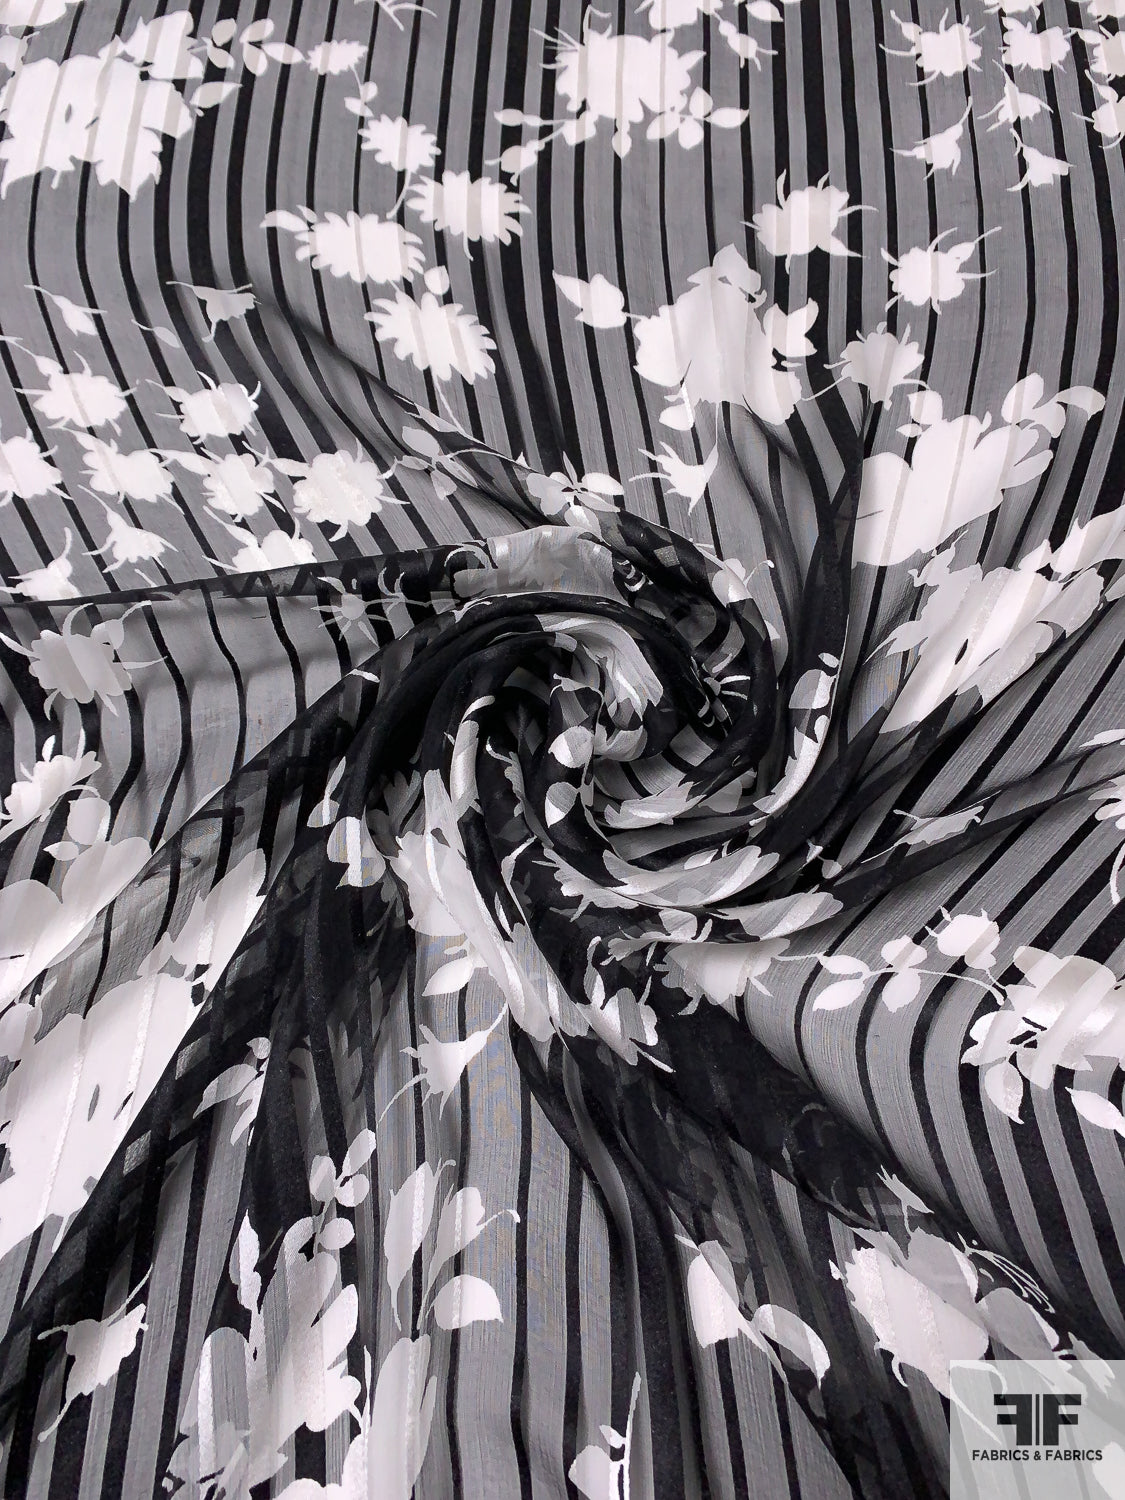 Floral Silhouette Printed Satin Striped Silk Chiffon - Black / Off-White -  Fabric by the Yard